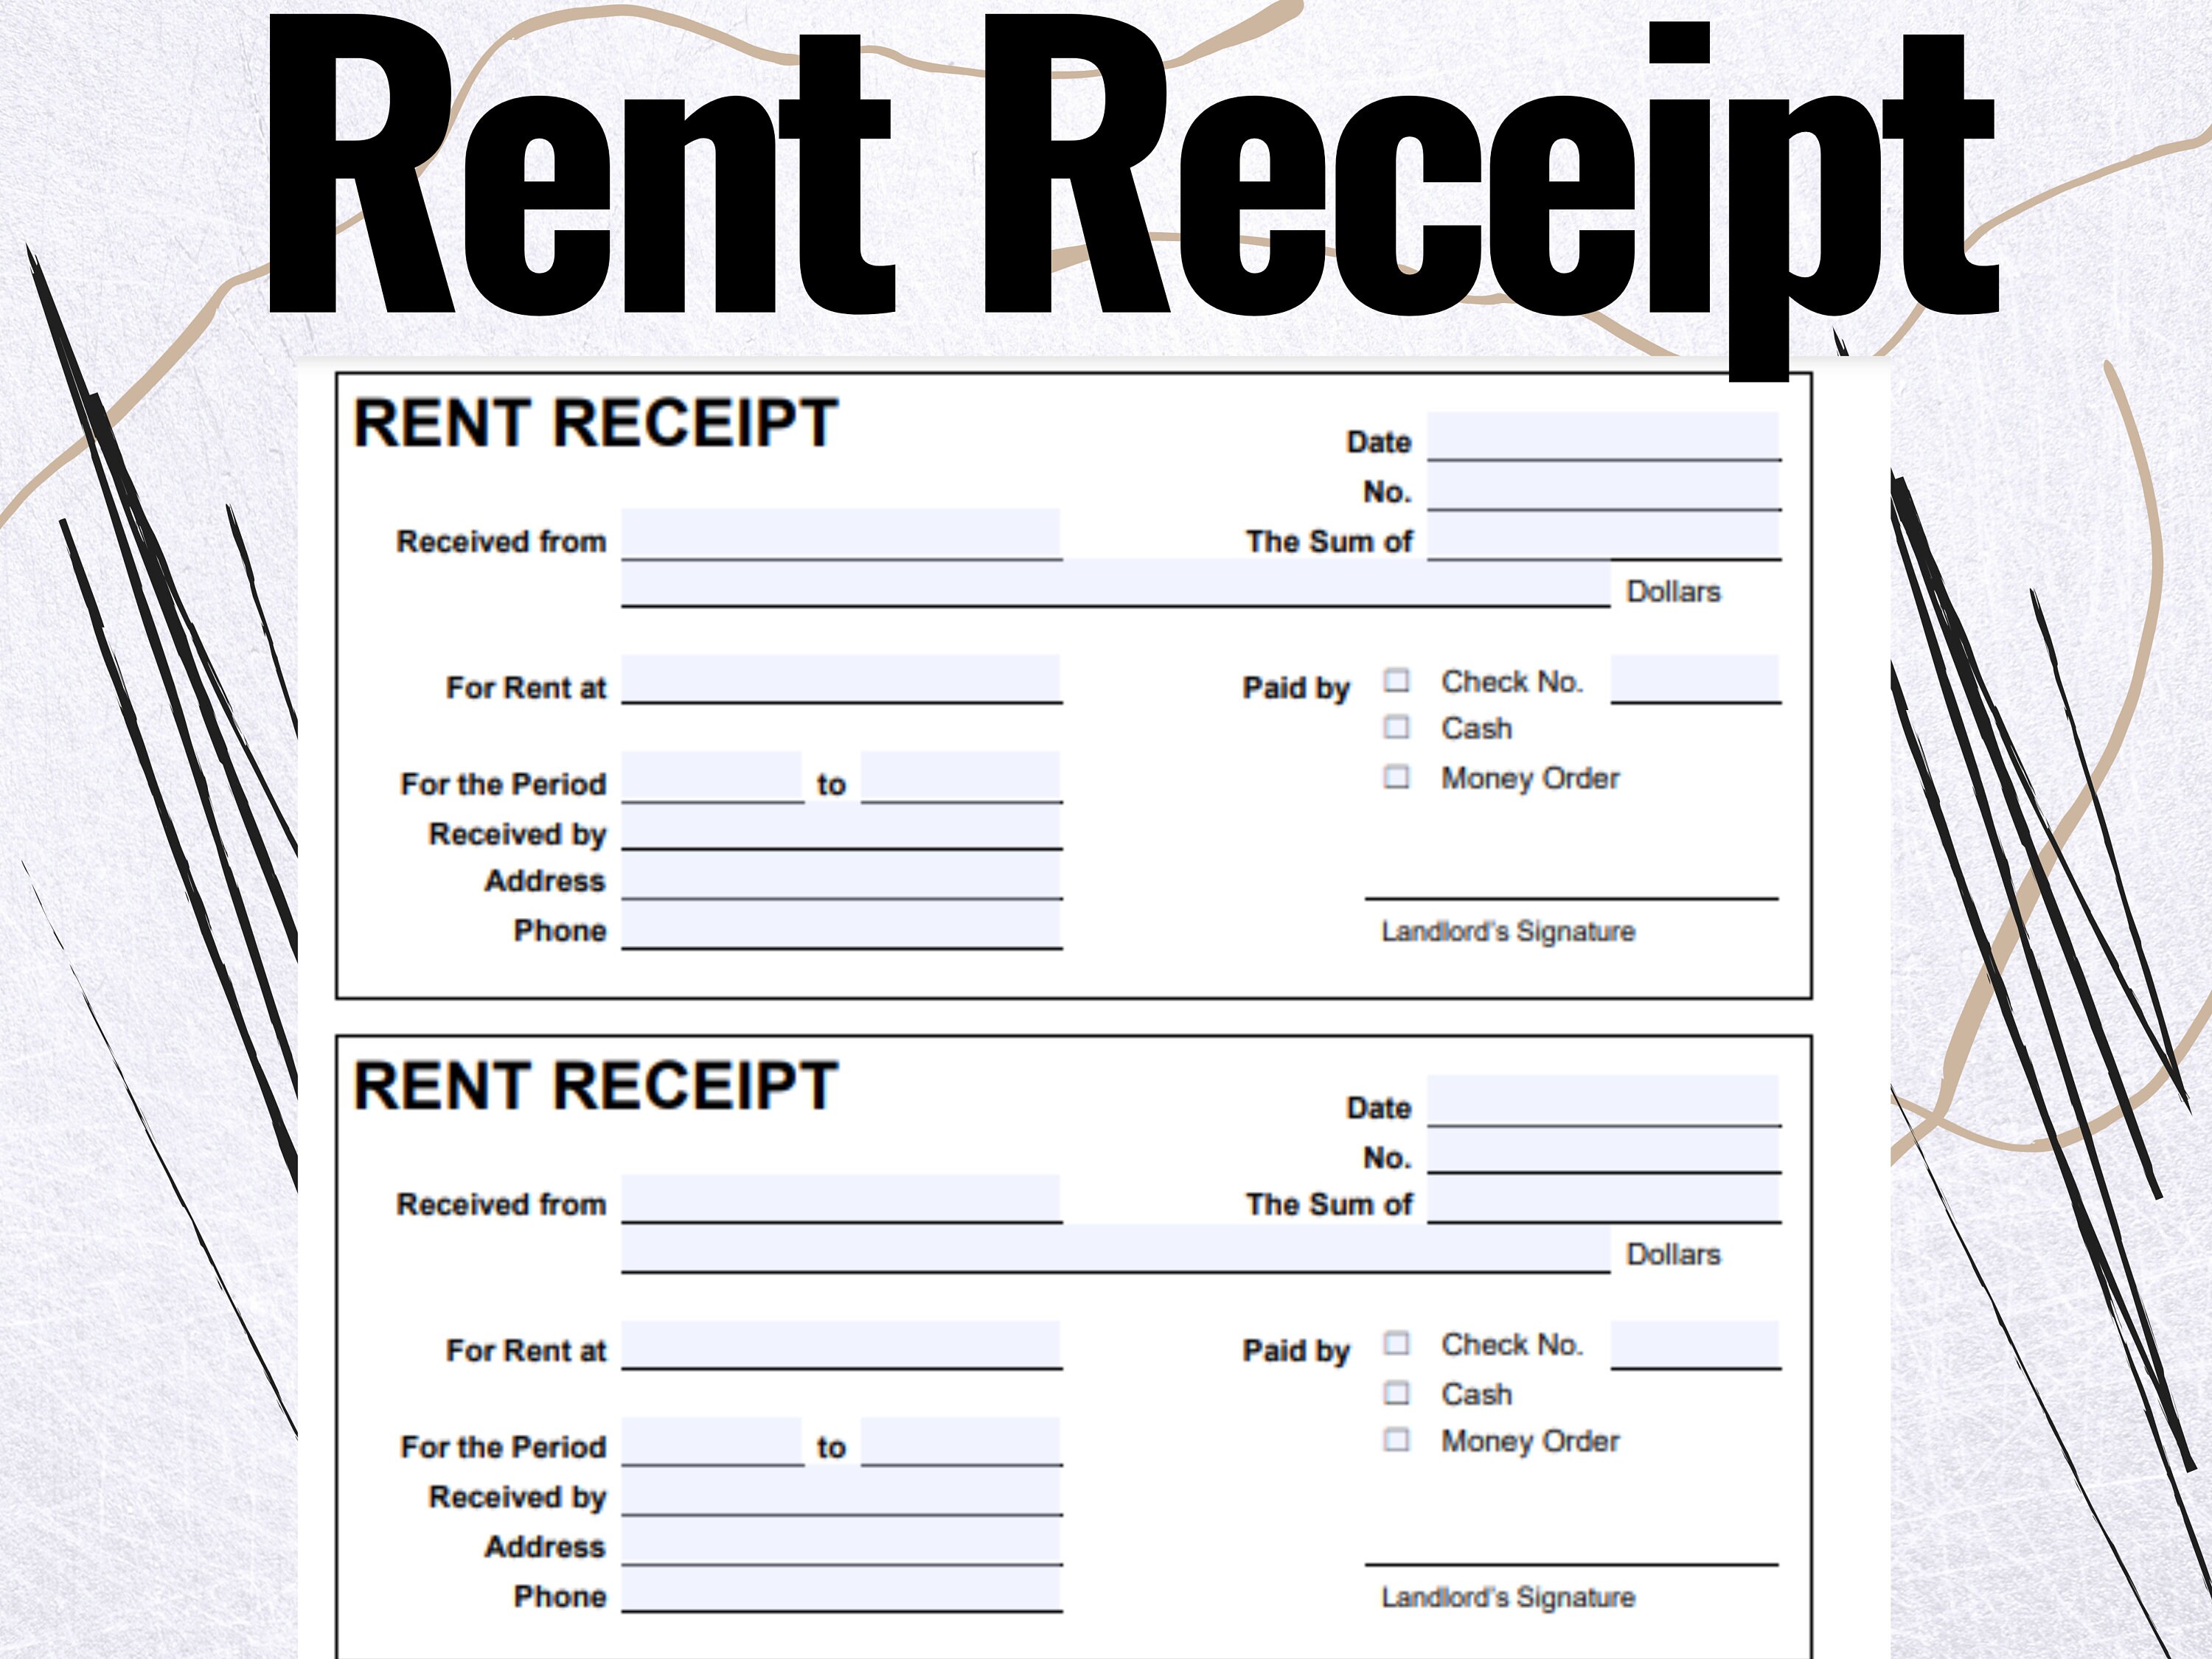 Rent Receipt Rent Receipt Forms Rent Receipt Template Download Now Etsy